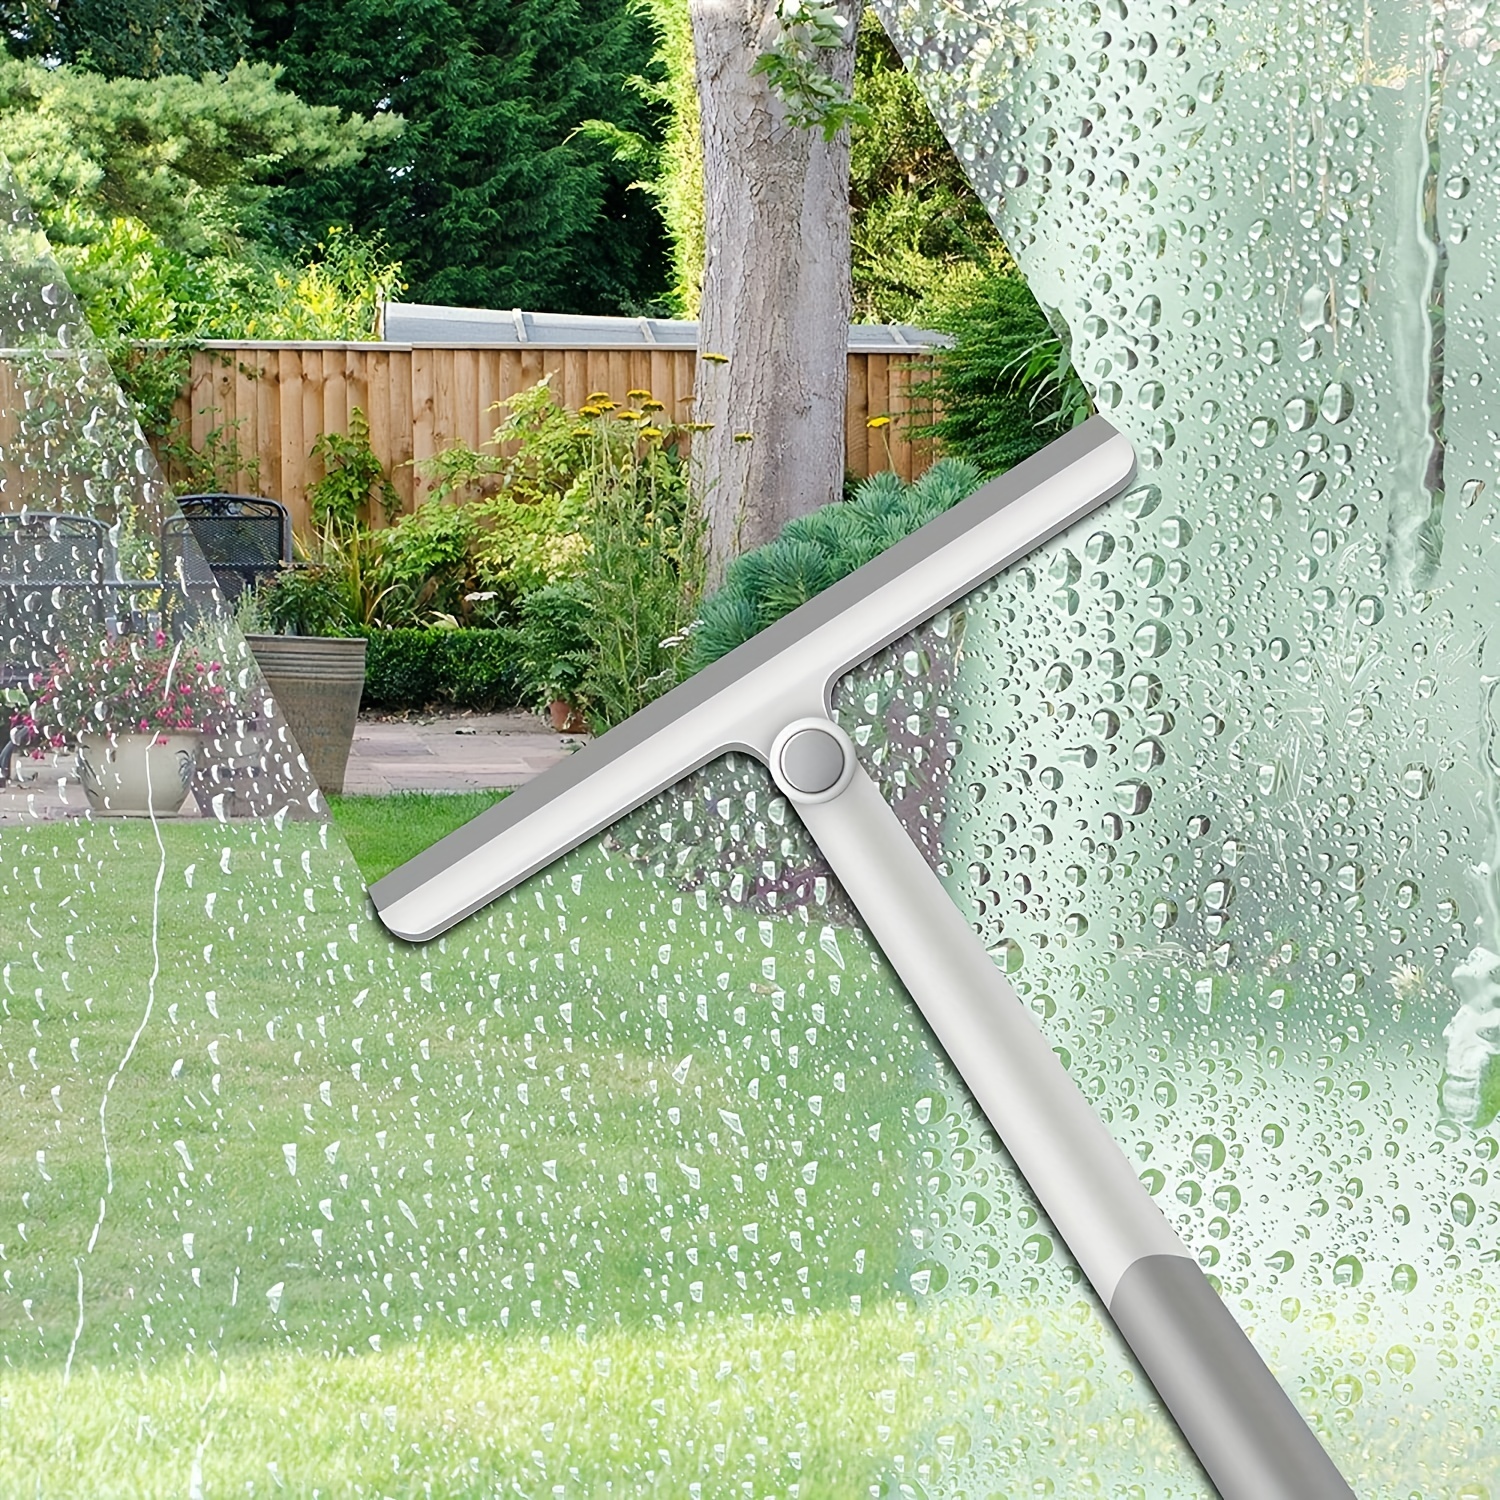 SetSail Shower Squeegee for Glass Doors Stainless Steel Squeegee for Shower  G